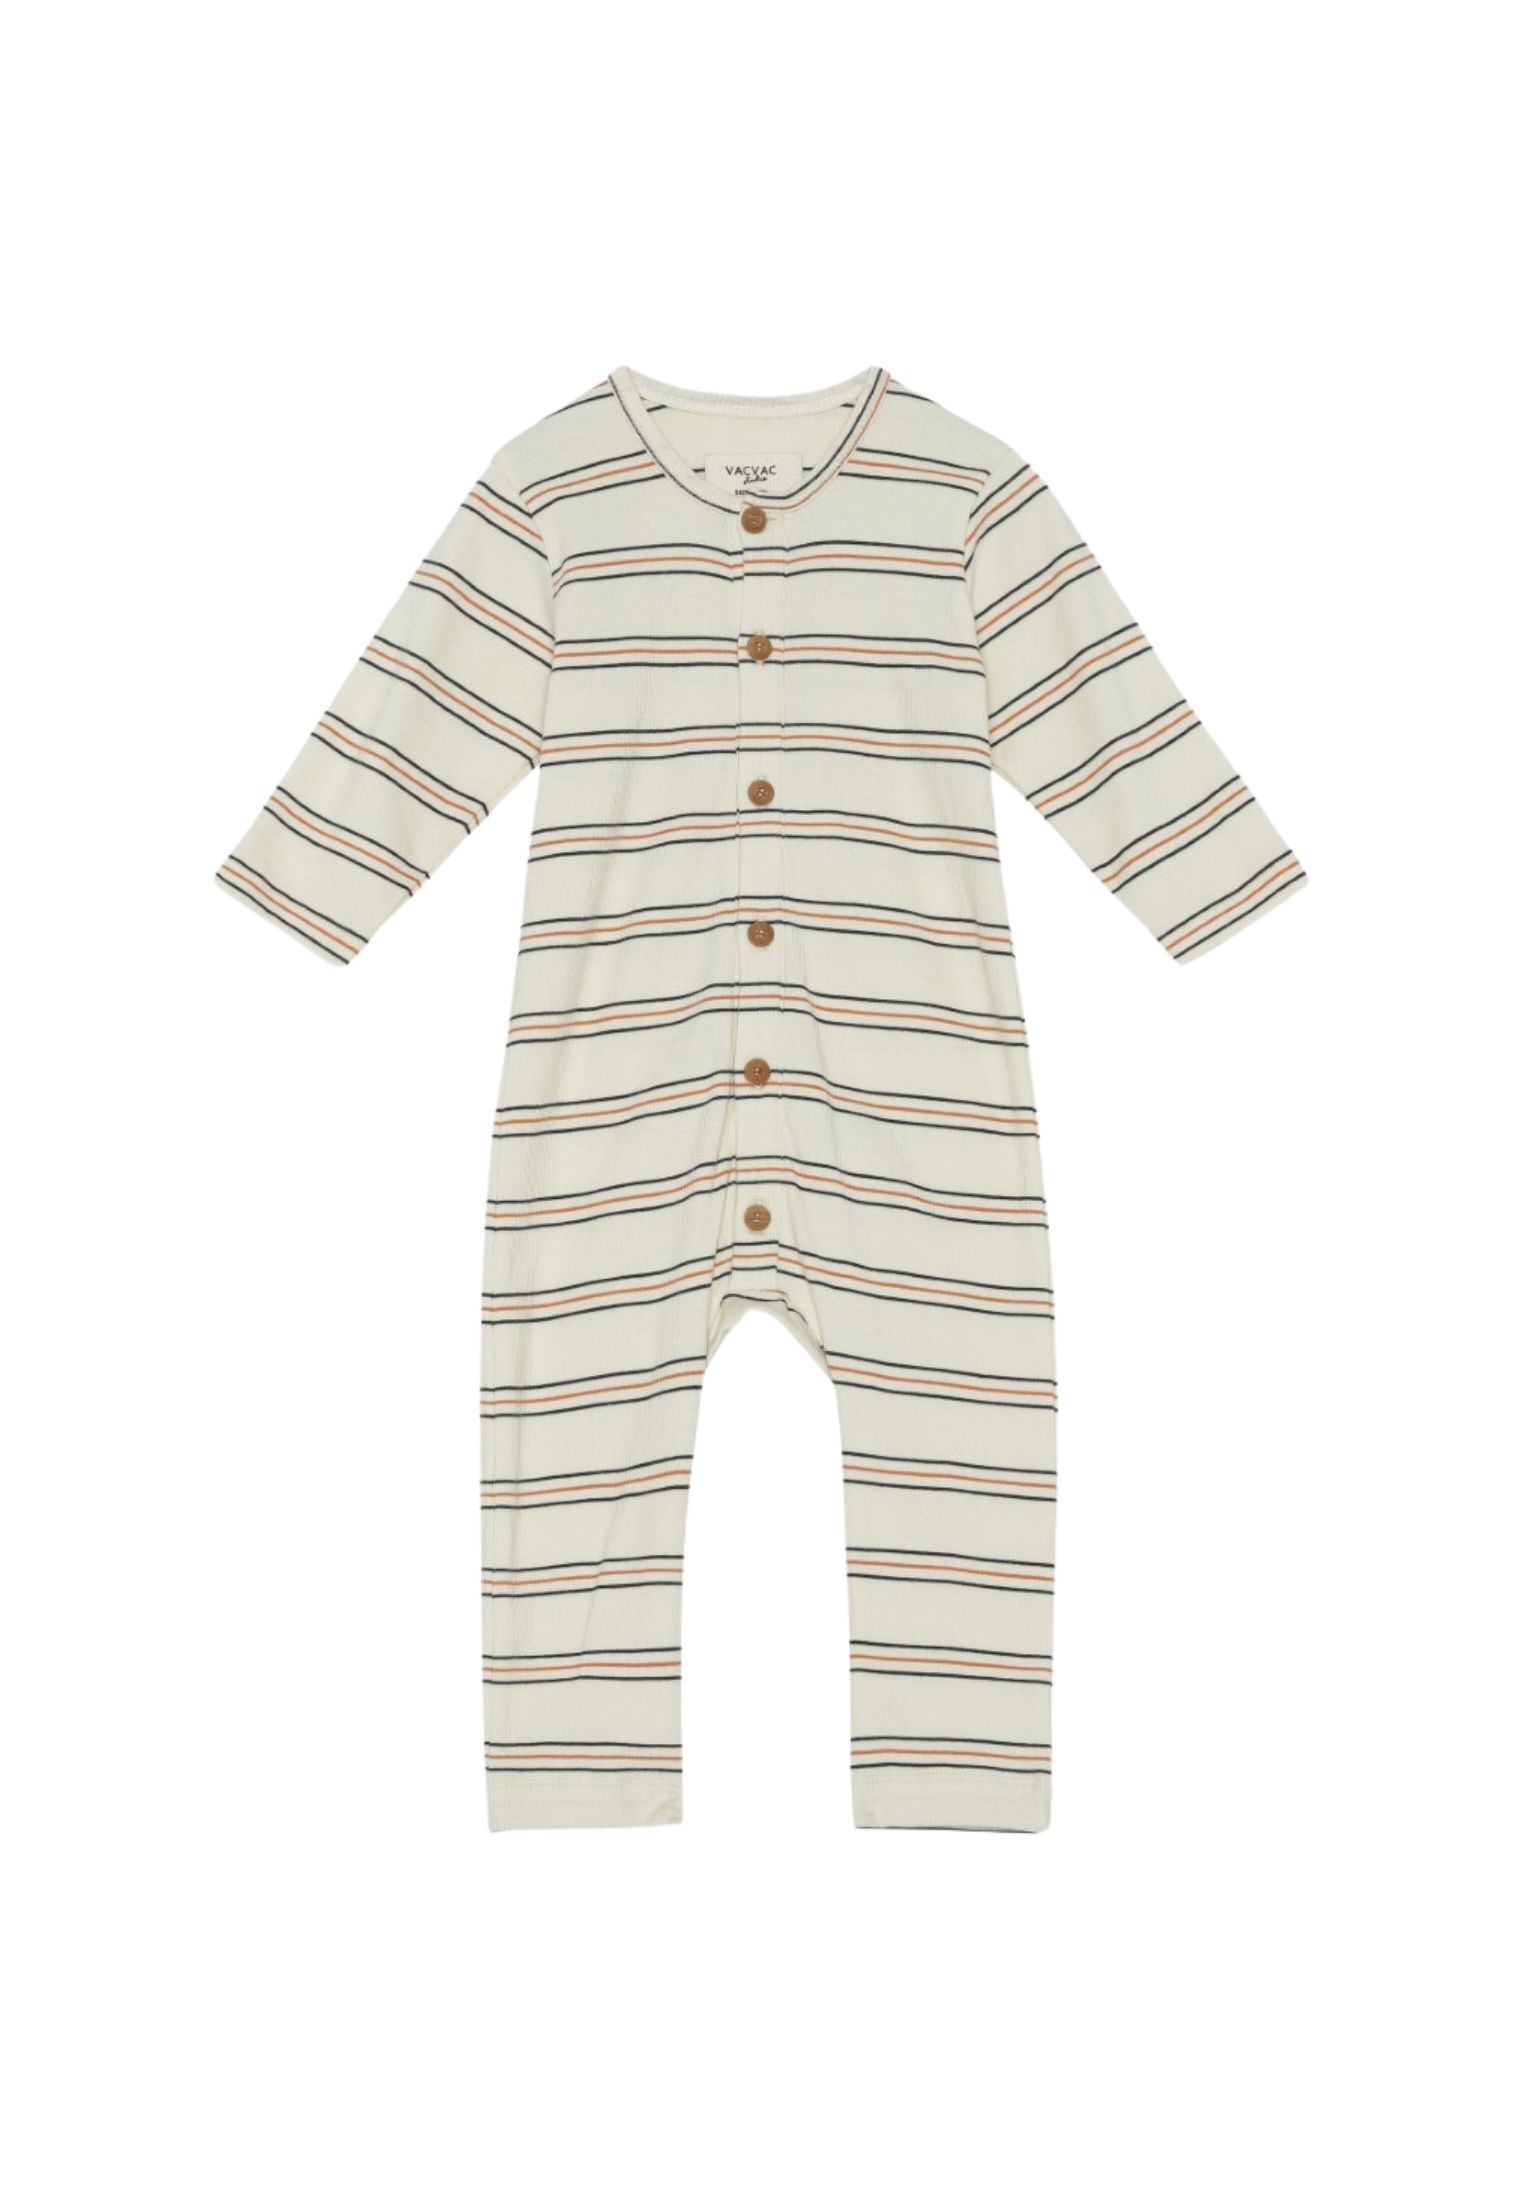 MAMA.LICIOUS Baby one-piece suit -Seed Pearl stripes - 99999962